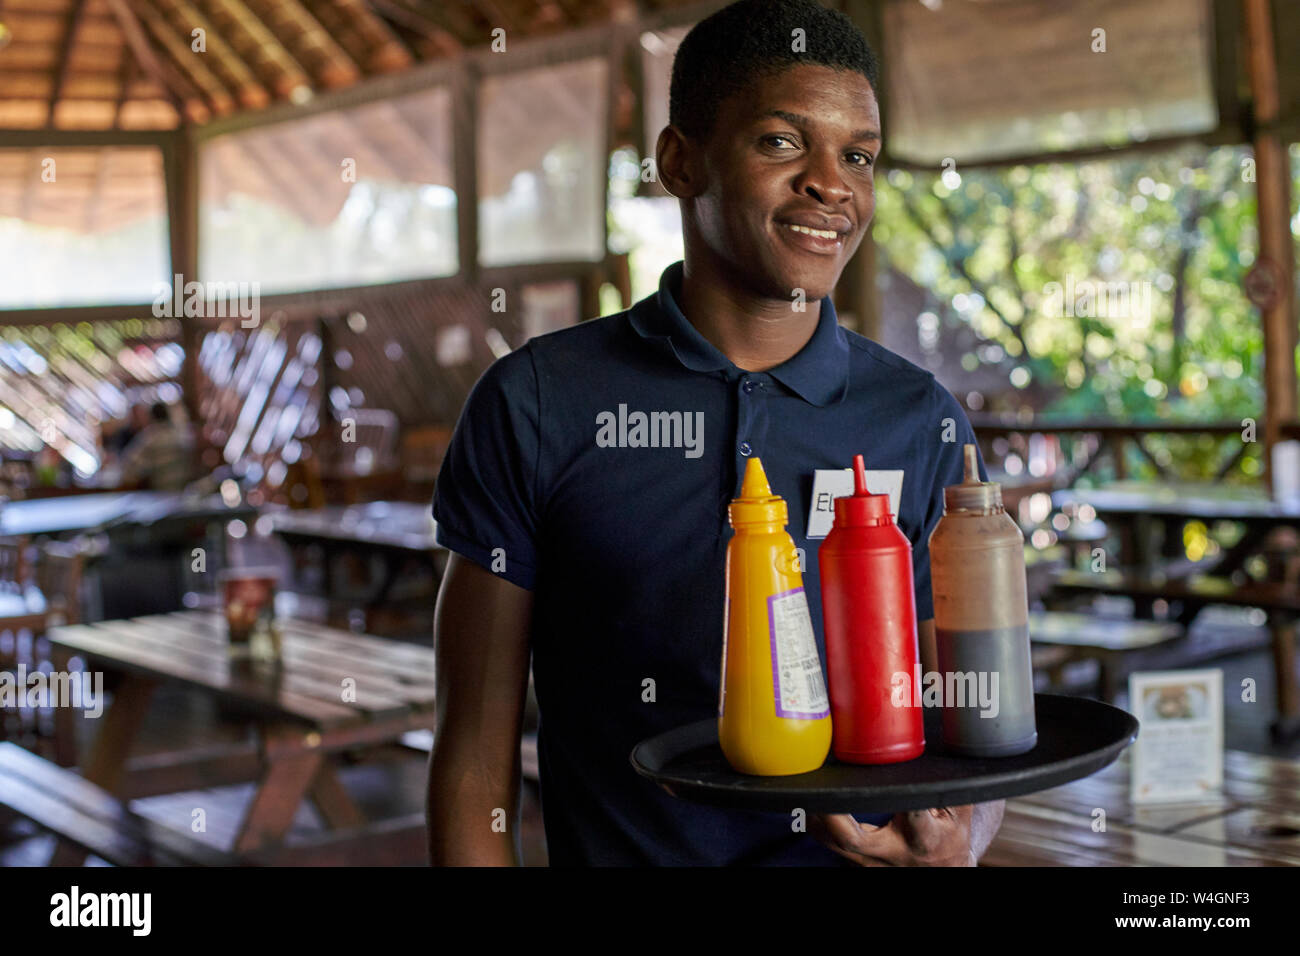 Young waiter serving sauces in bottles in a restaurant, South Africa Stock Photo